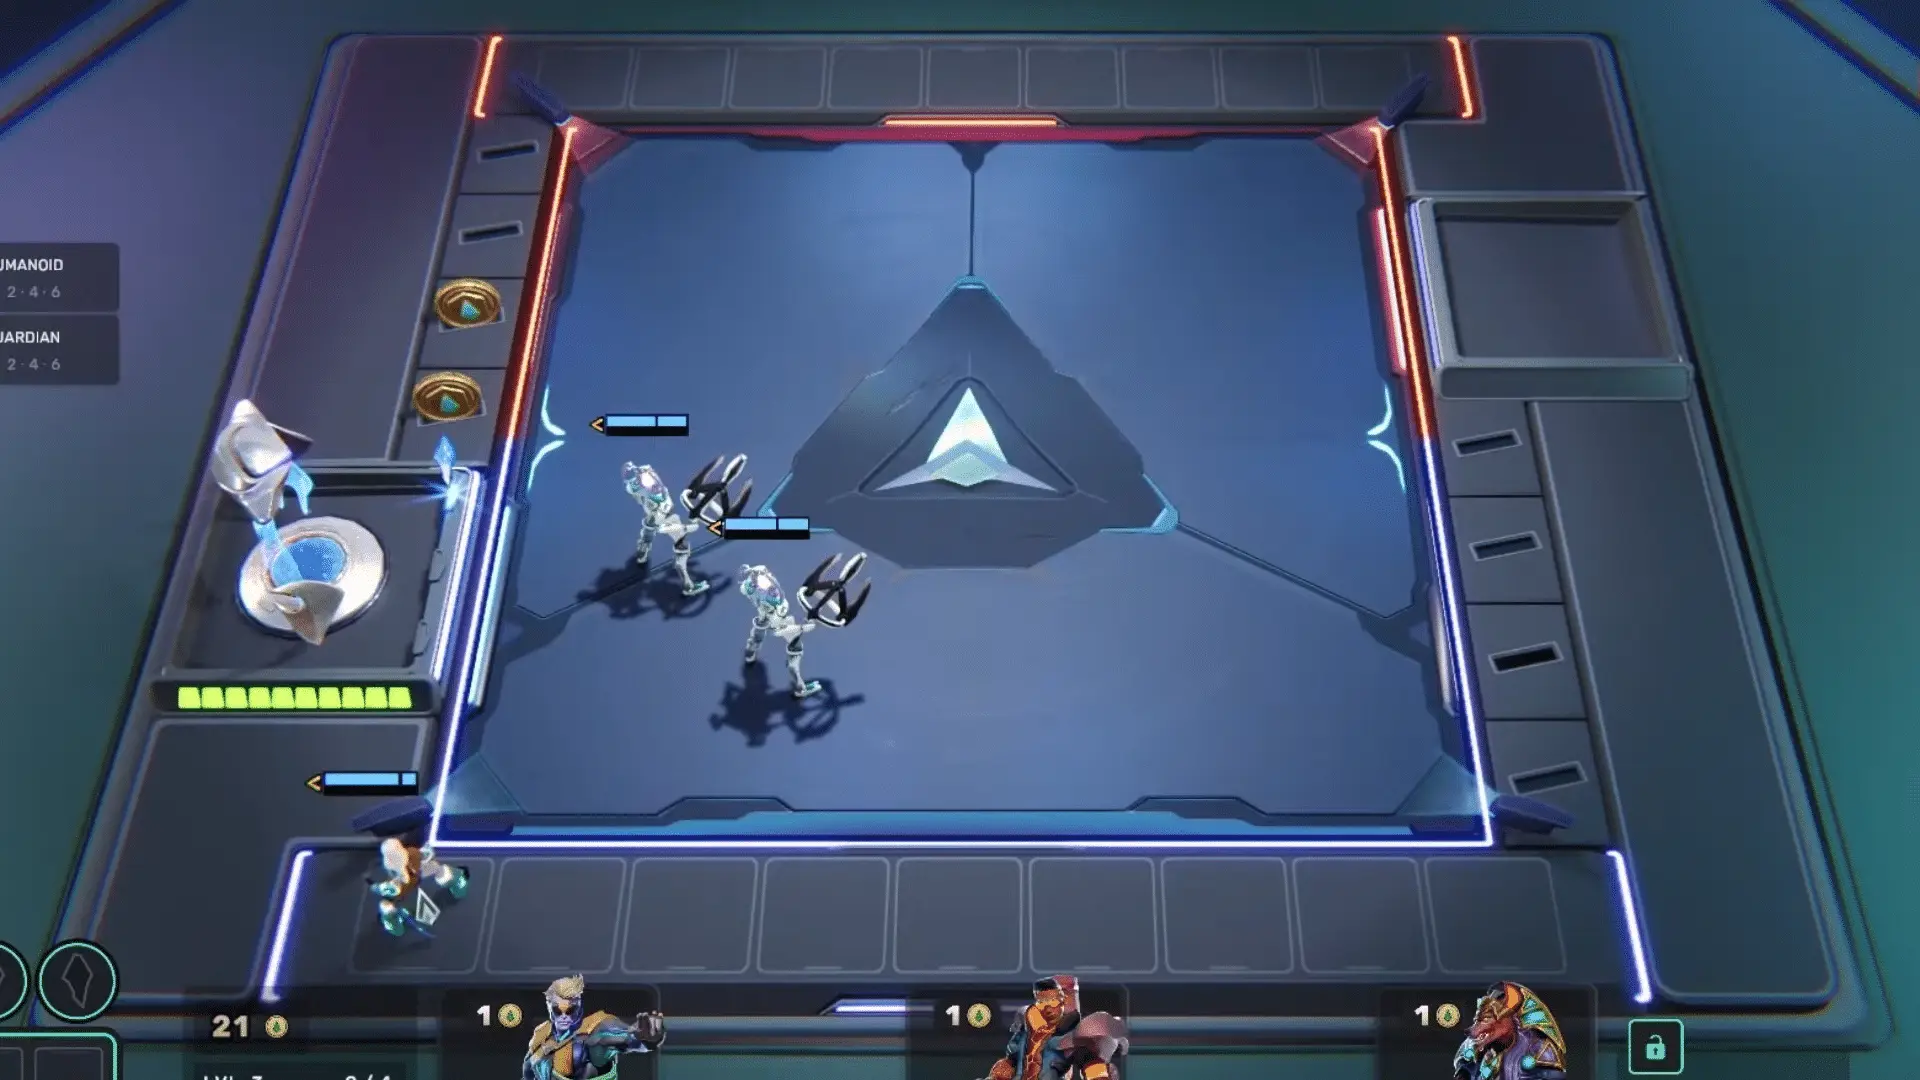 Cyber Titans: Chess Auto Battler-Inspired Strategy Game - Play To Earn Games